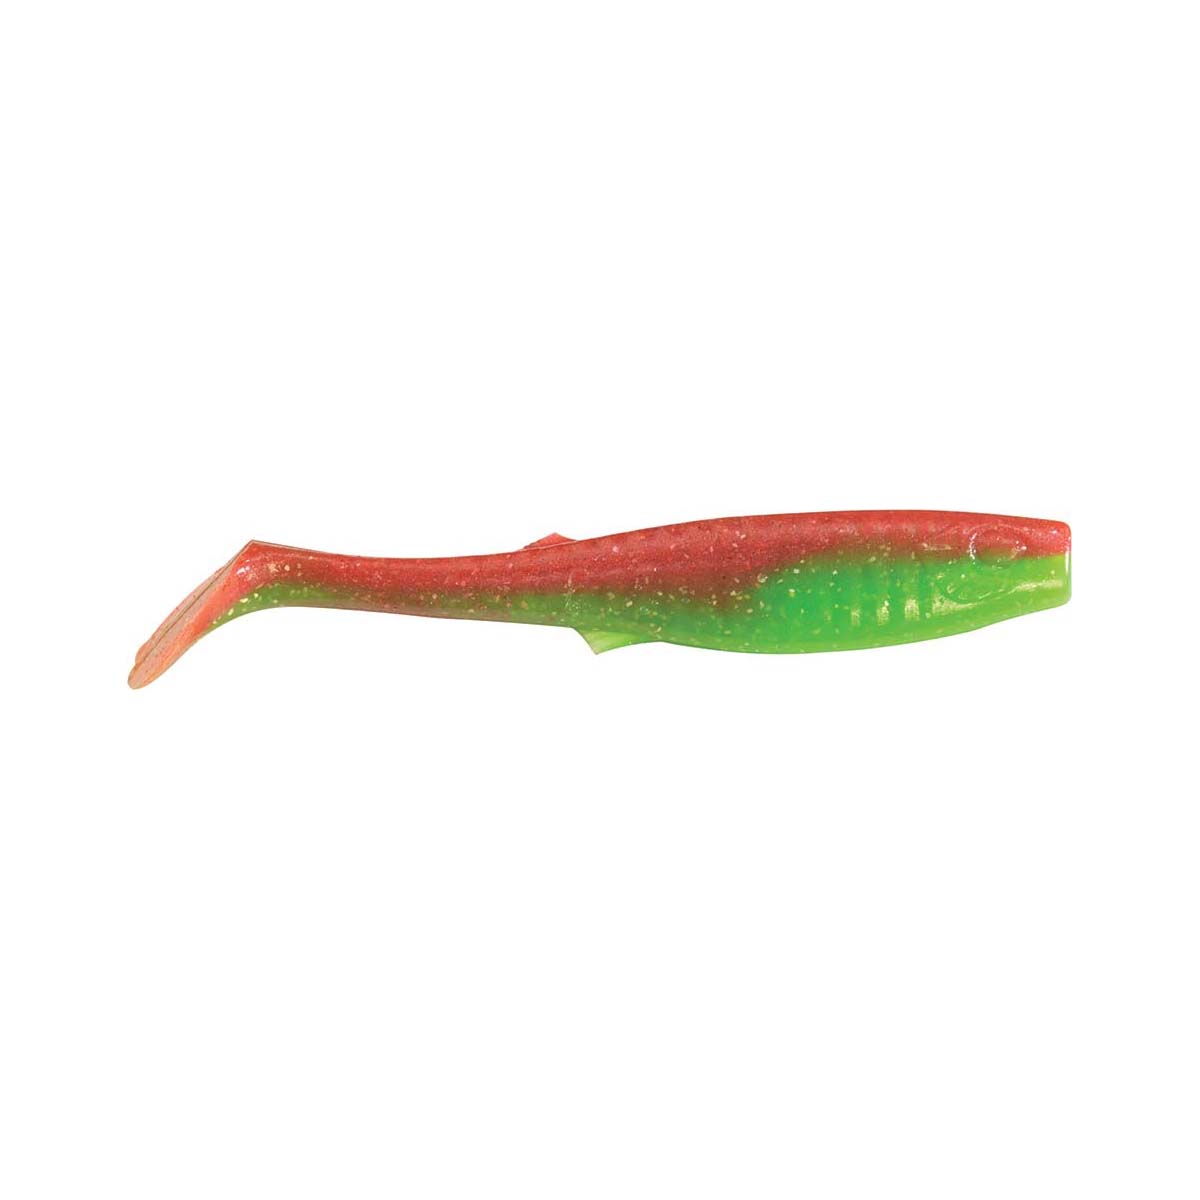 Berkley Gulp! Paddletail Shad Soft Plastic Lure 4in Nuclear Chicken